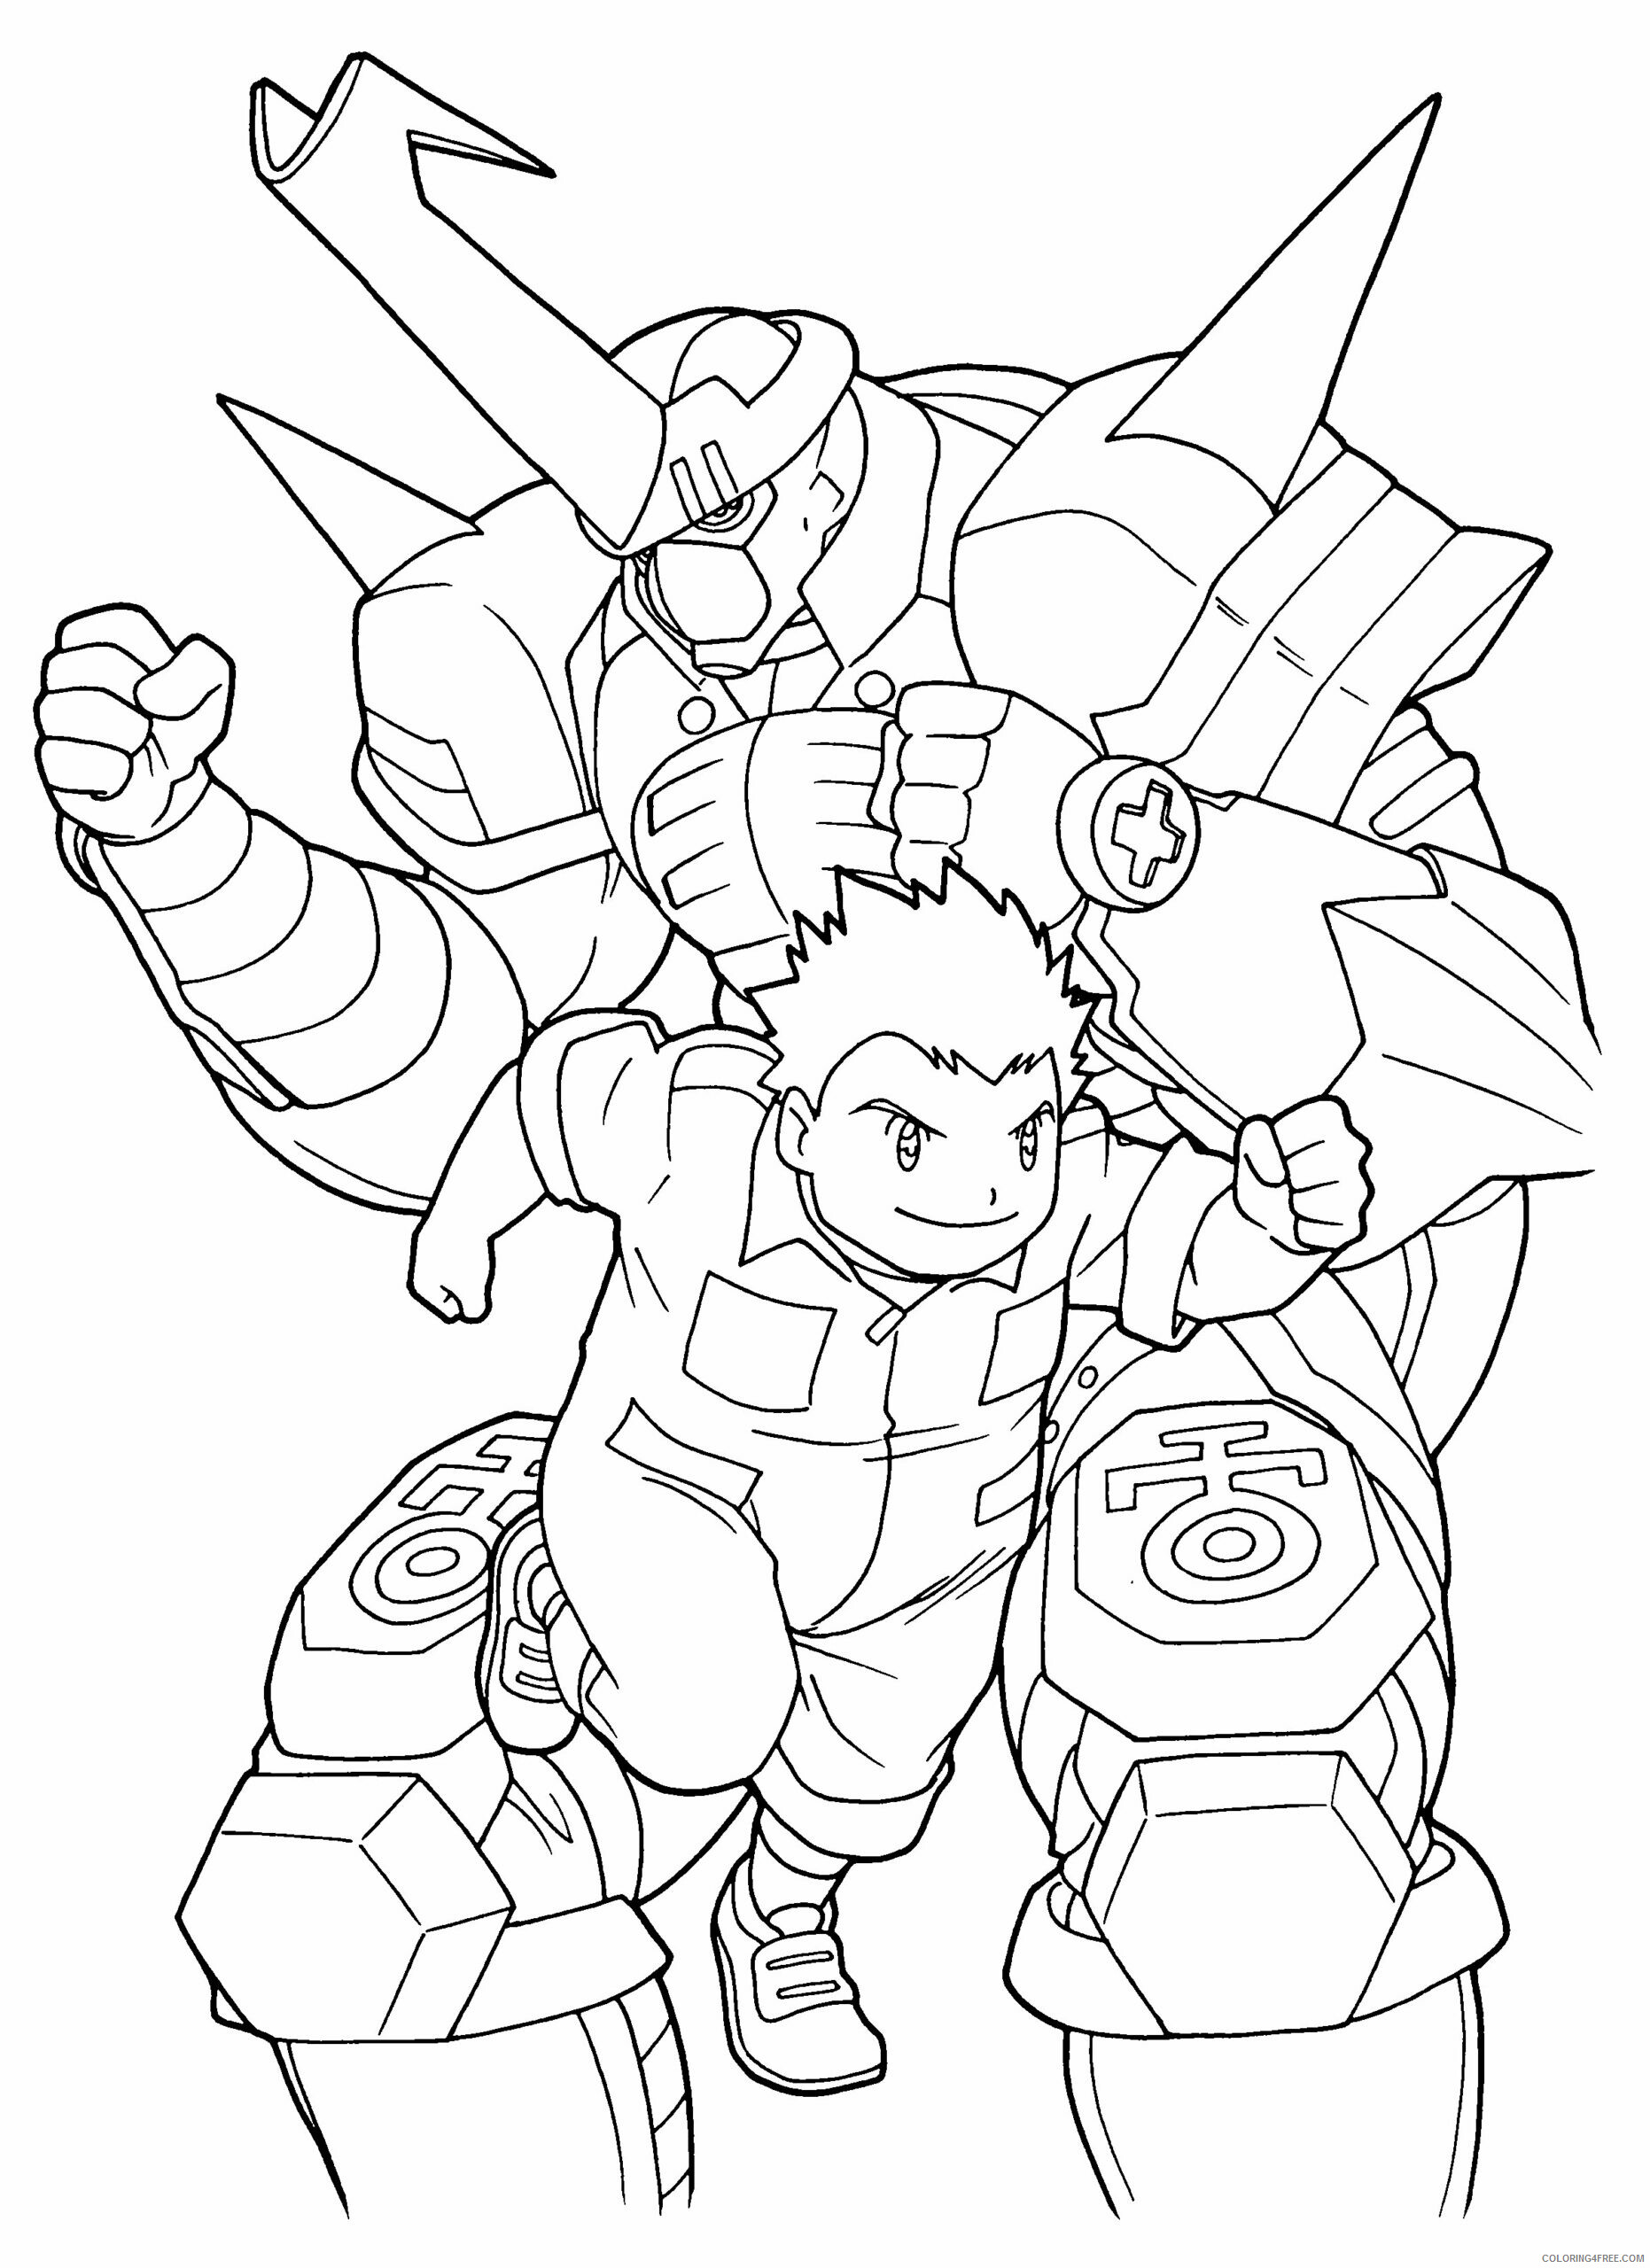 Digimon Printable Coloring Pages Anime digimon 70 2021 0366 Coloring4free